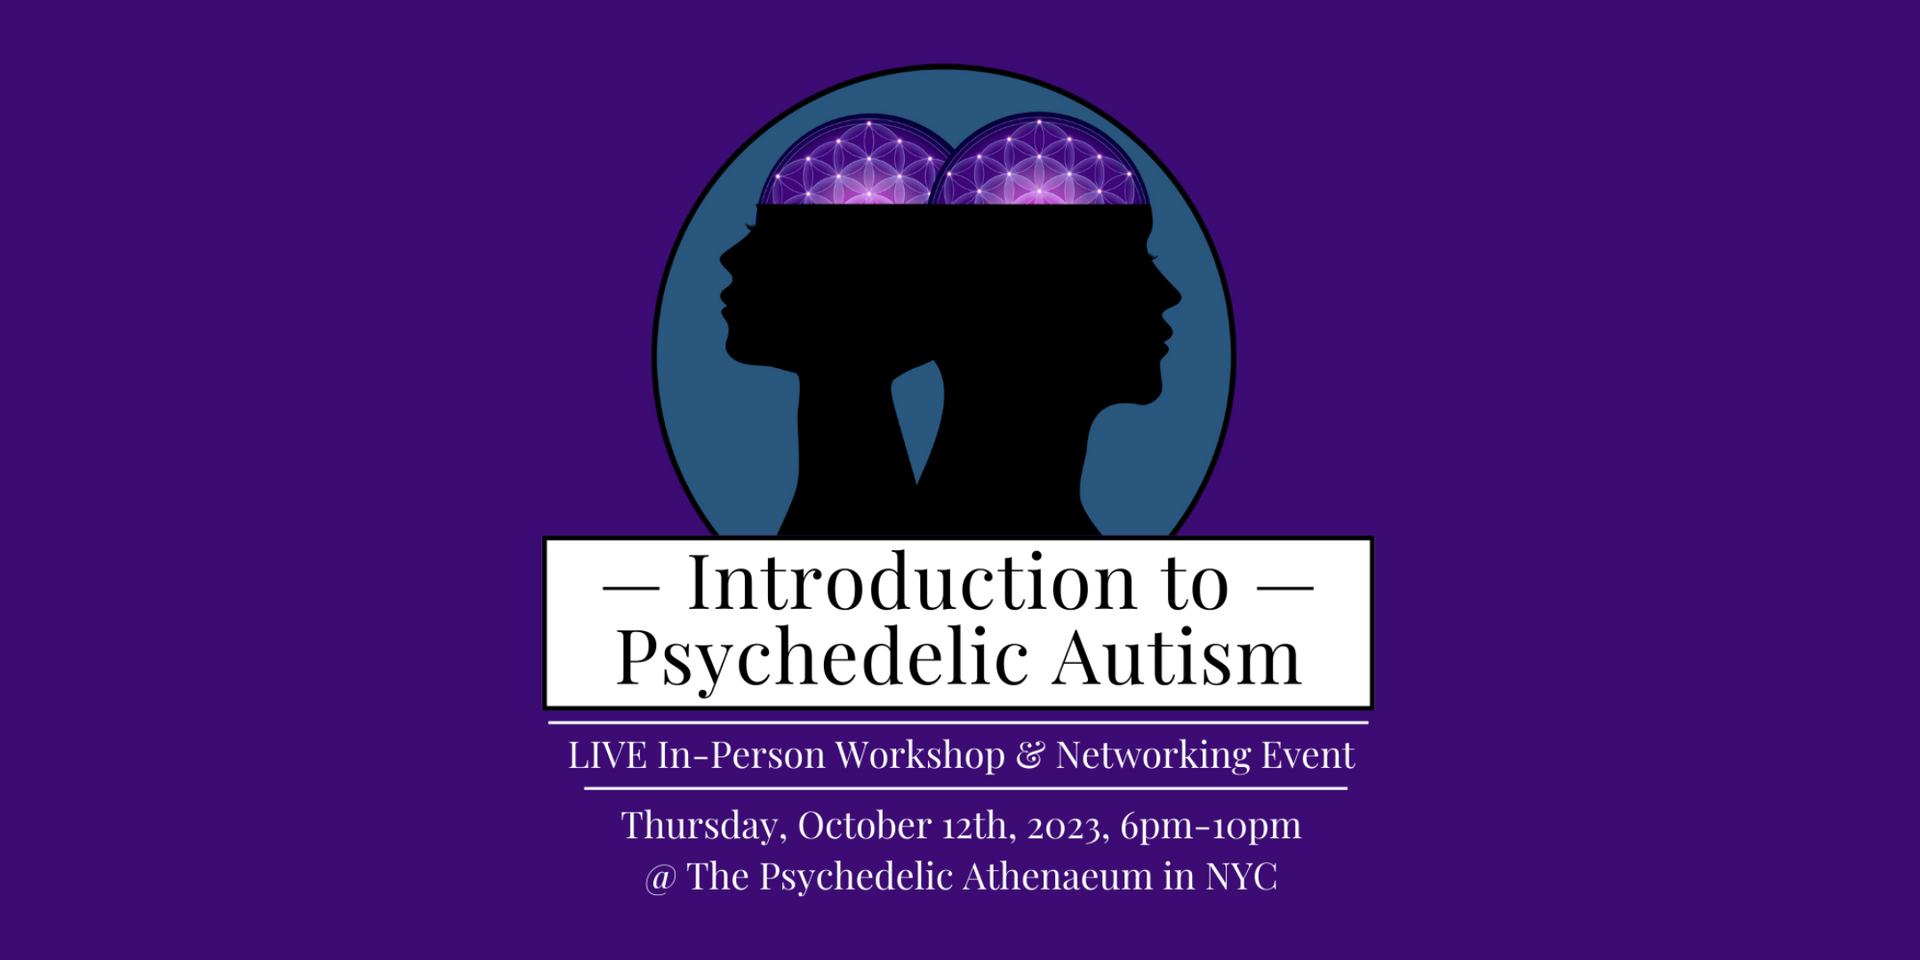 A poster for an introduction to psychedelic autism event.